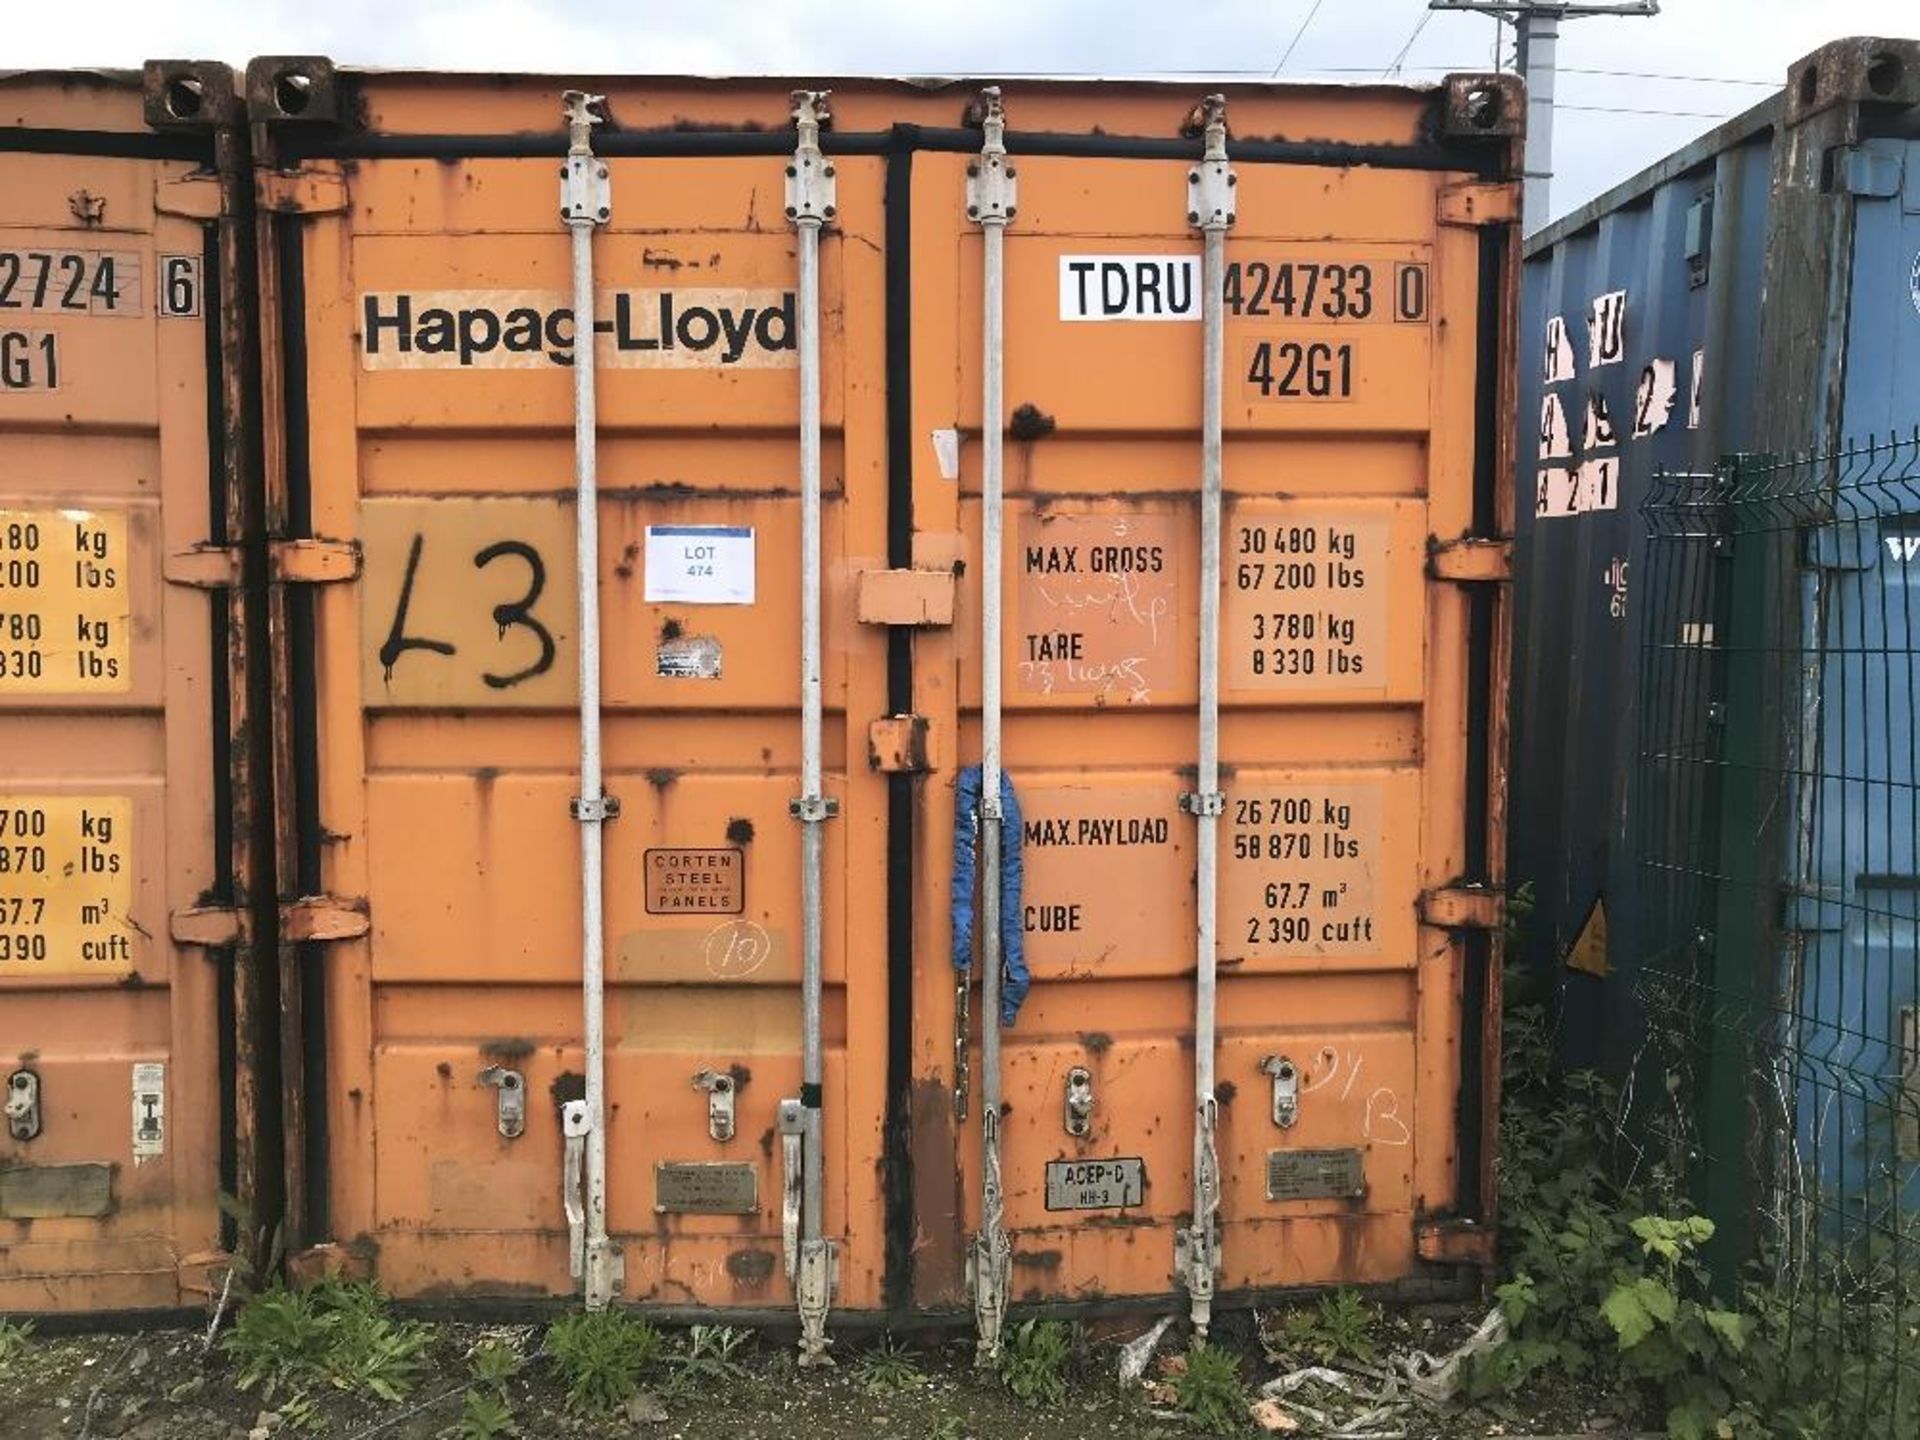 40ft Steel shipping container with remaining contents